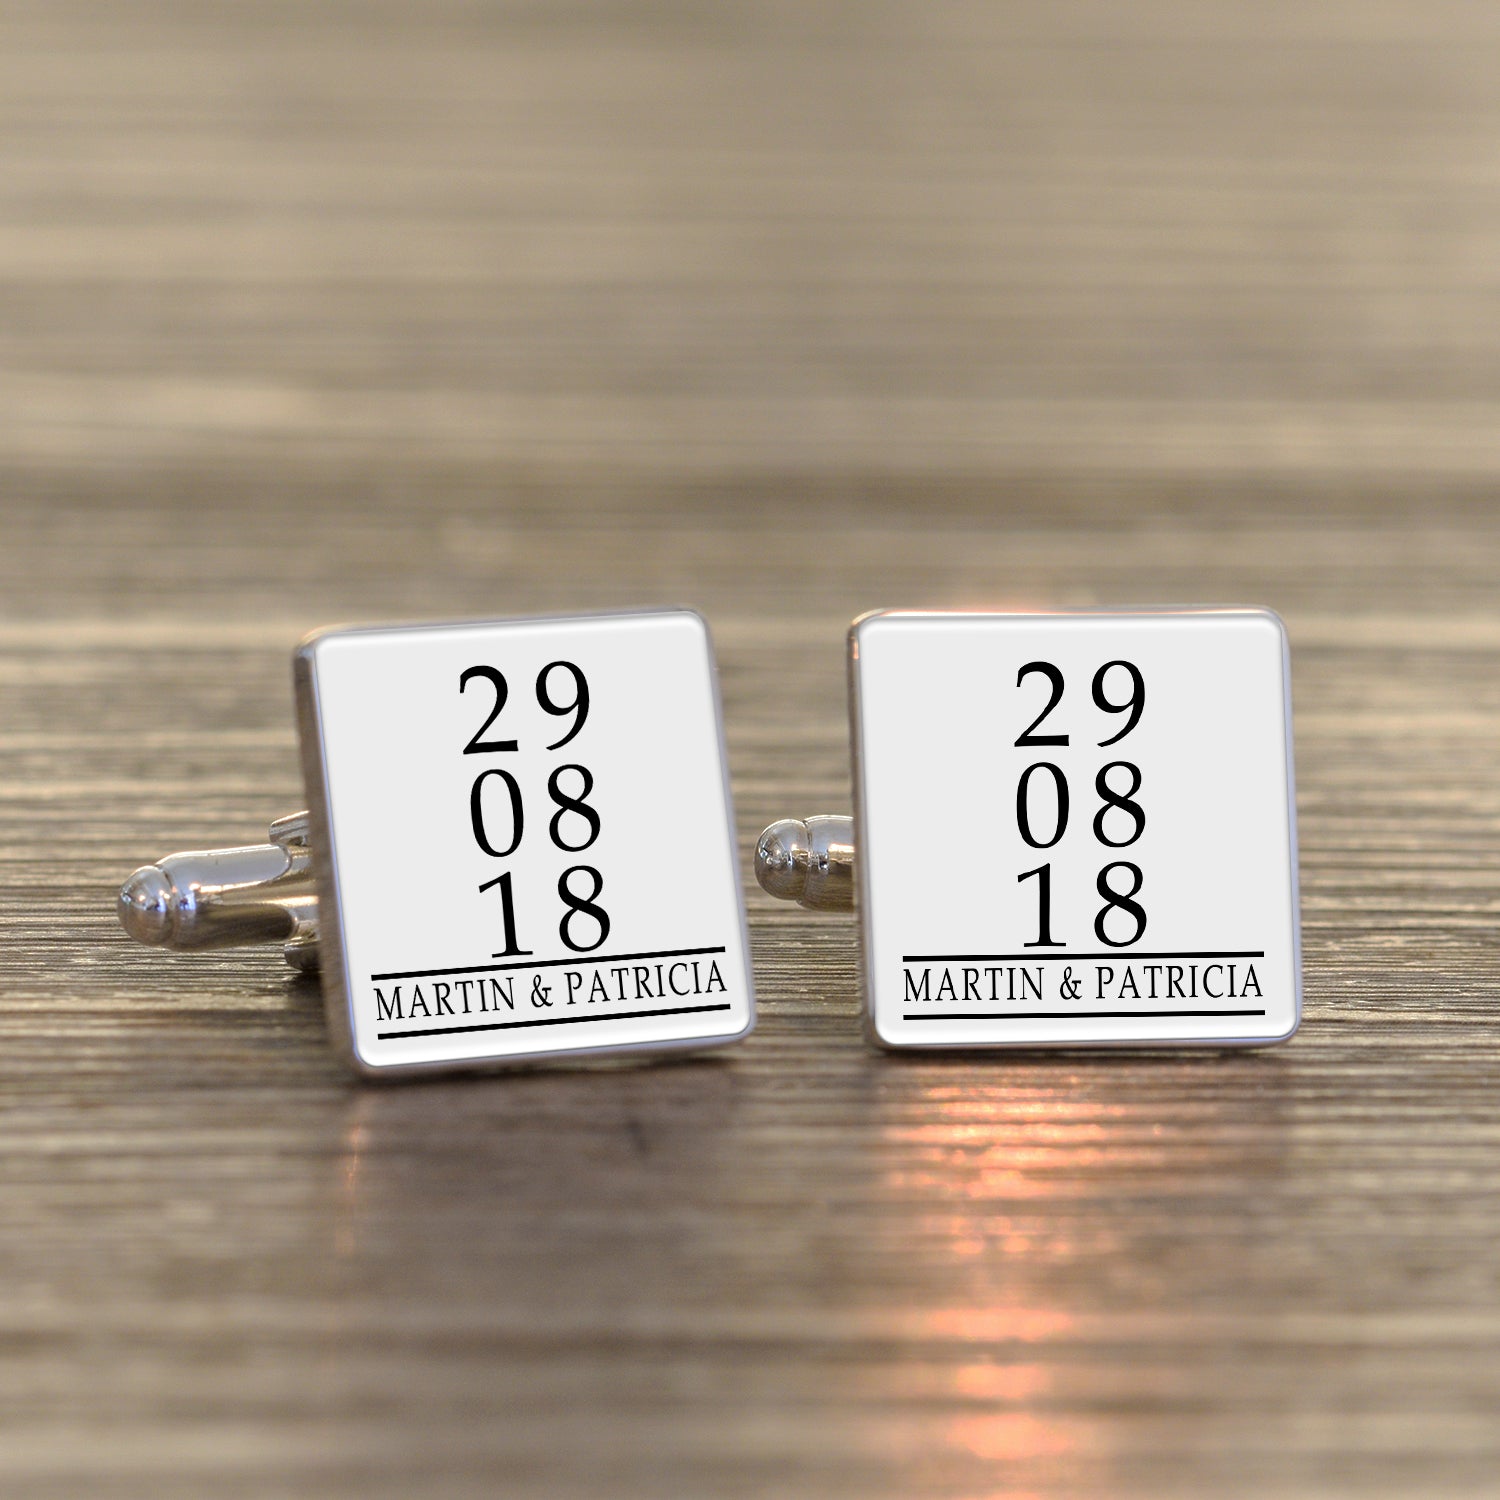 Personalised Special Date/s & Message Cufflinks - PCS Cufflinks & Gifts